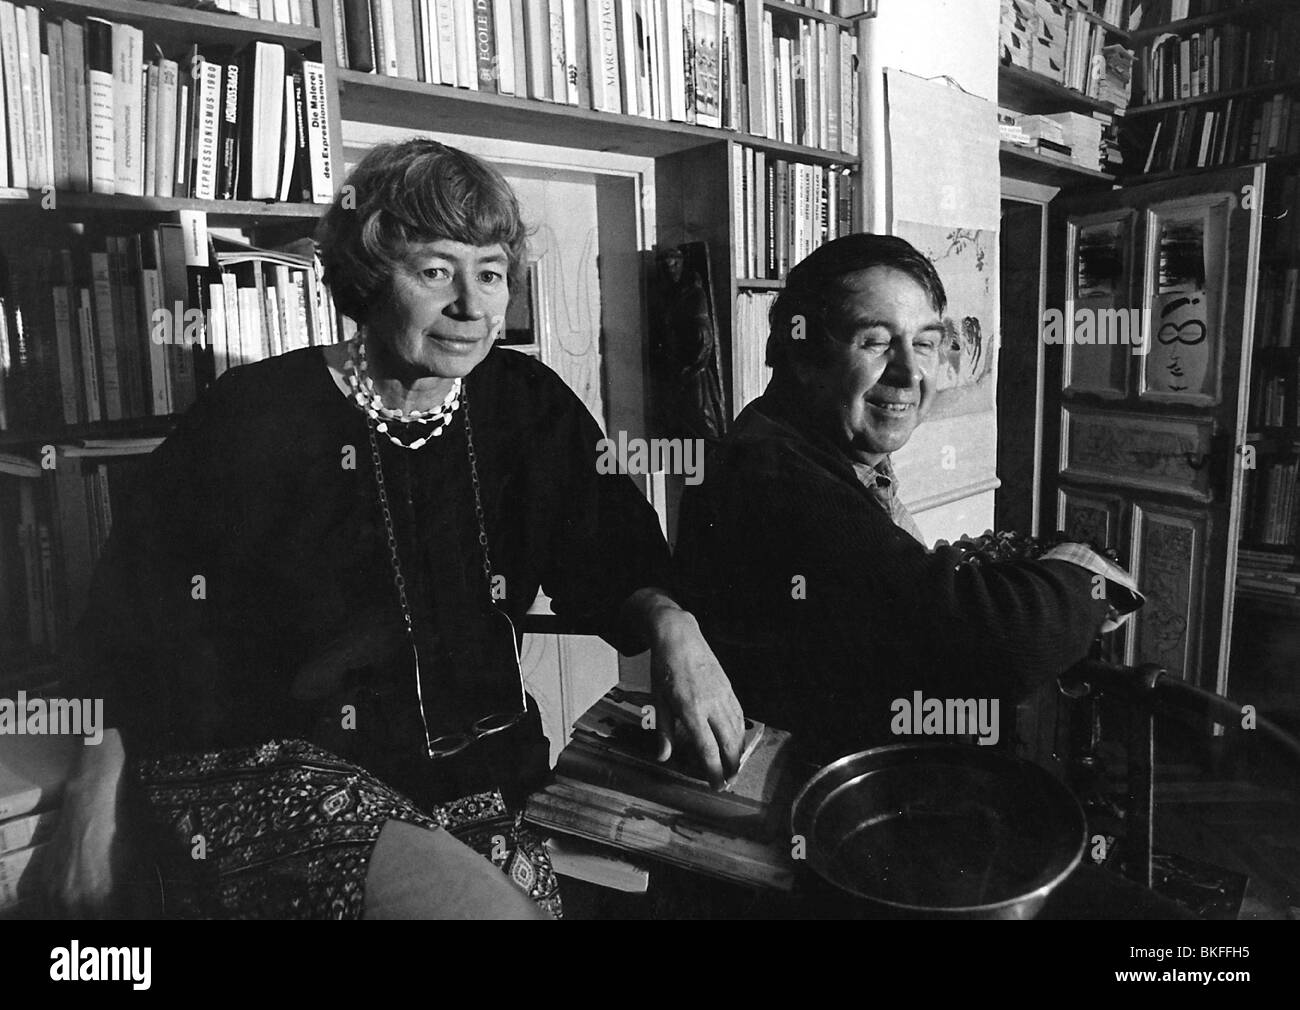 Buchheim, Lothar-Guenther, 6.2.1918 - 22.2.2007, German author / writer, painter, half length, with his wife, 1970s, Stock Photo